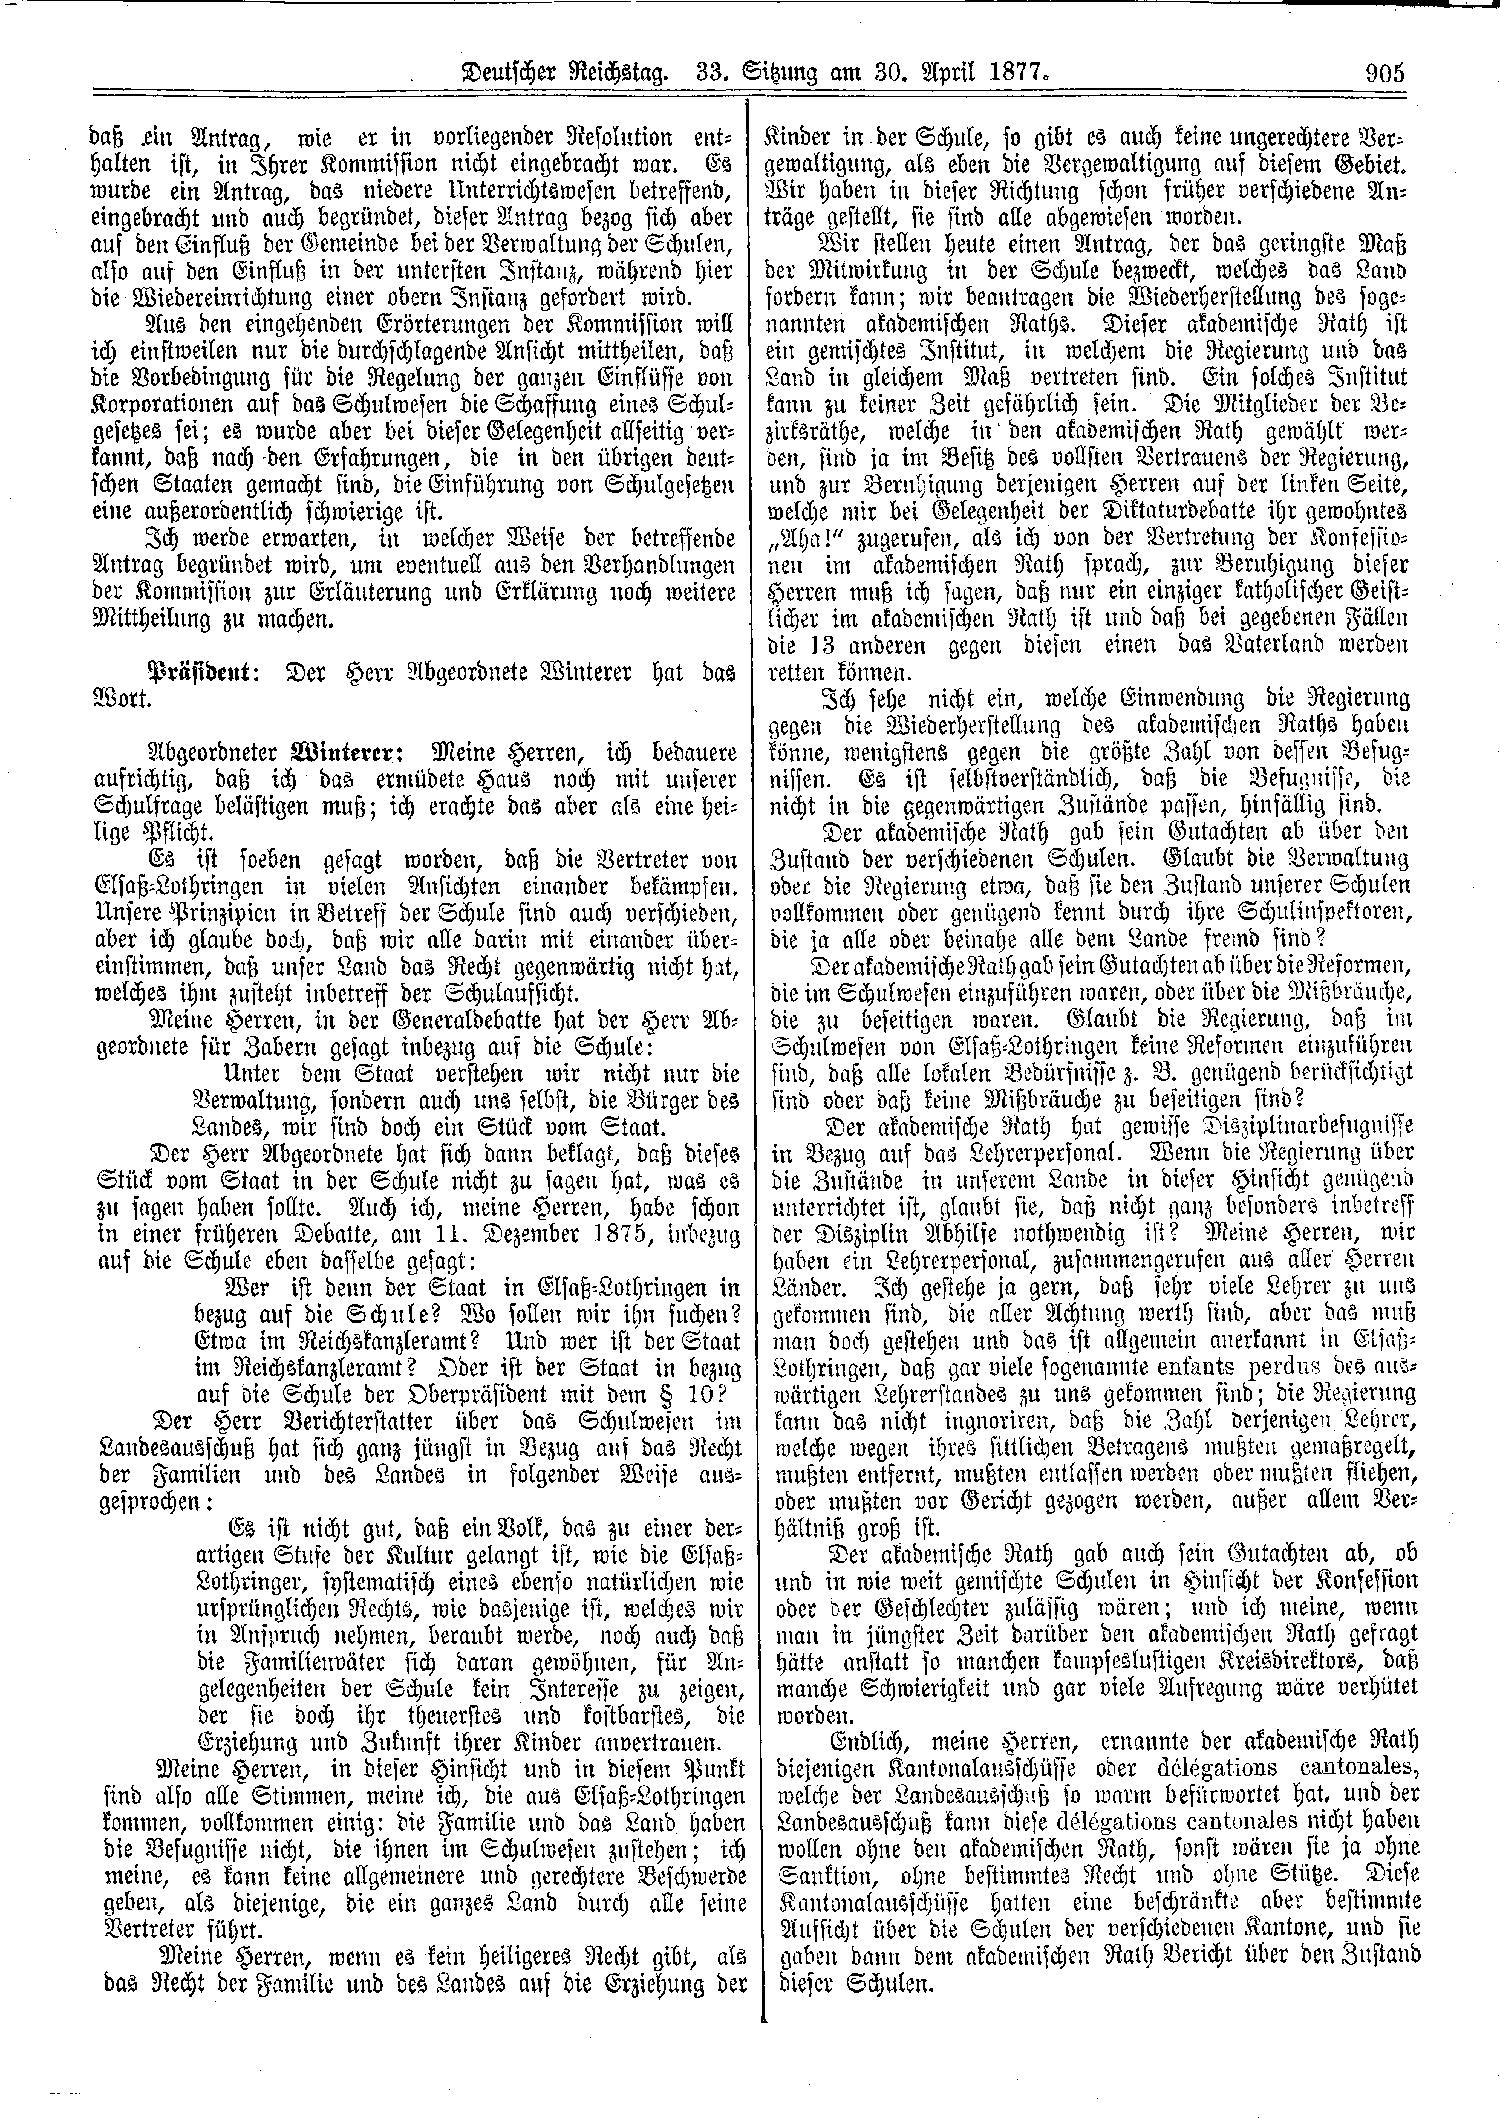 Scan of page 905